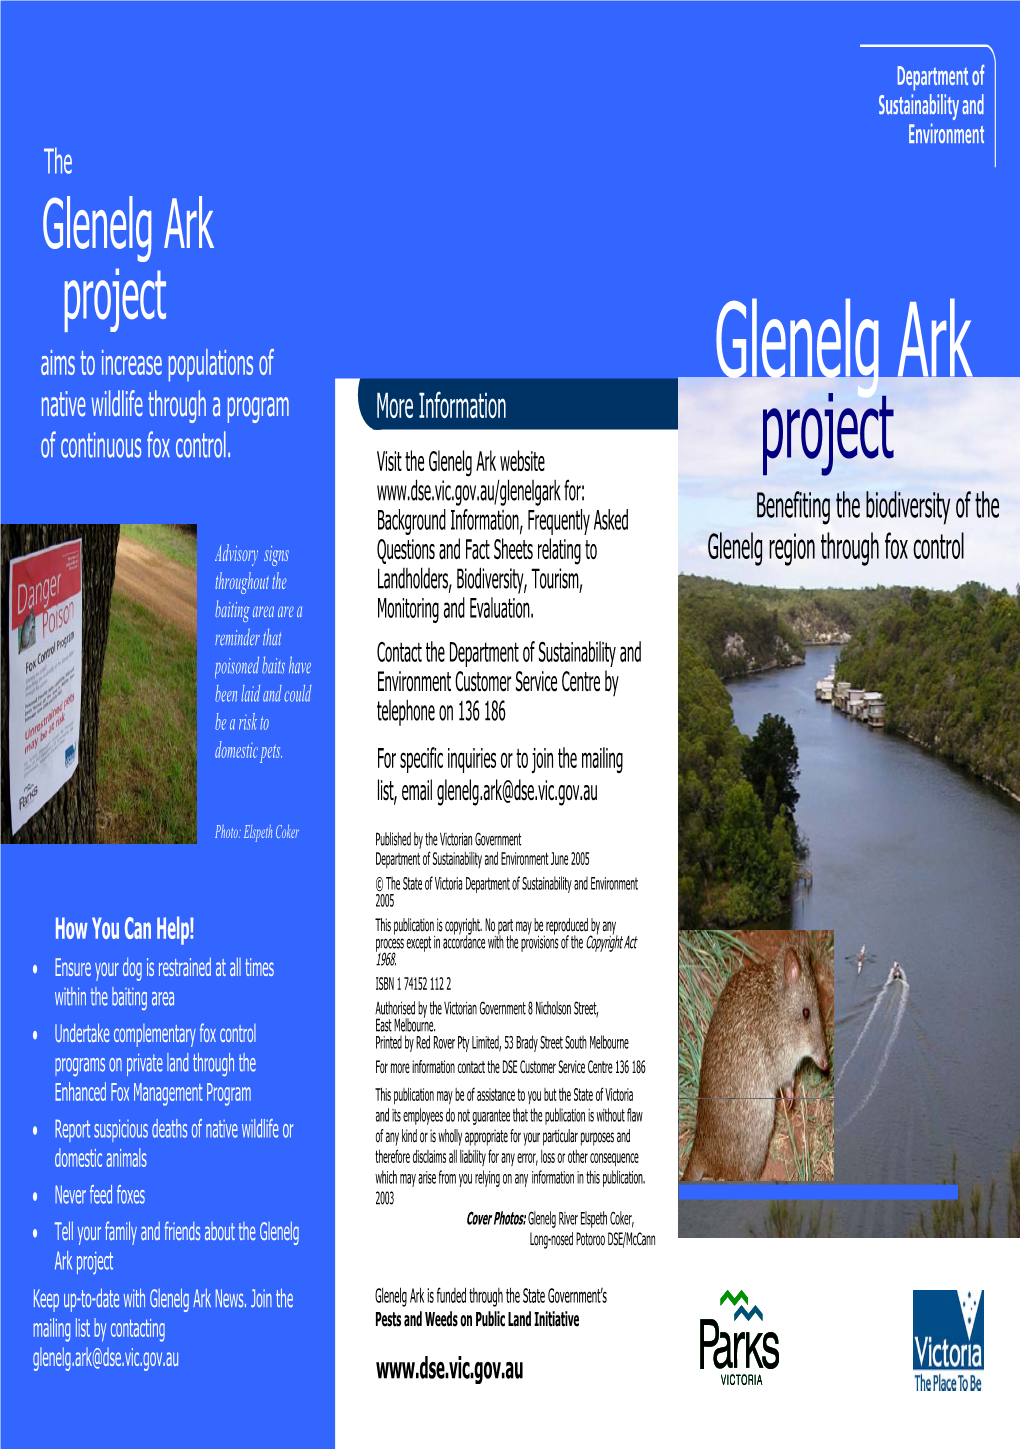 Glenelg Ark Project Aims to Increase Populations of Glenelg Ark Native Wildlife Through a Program More Information of Continuous Fox Control